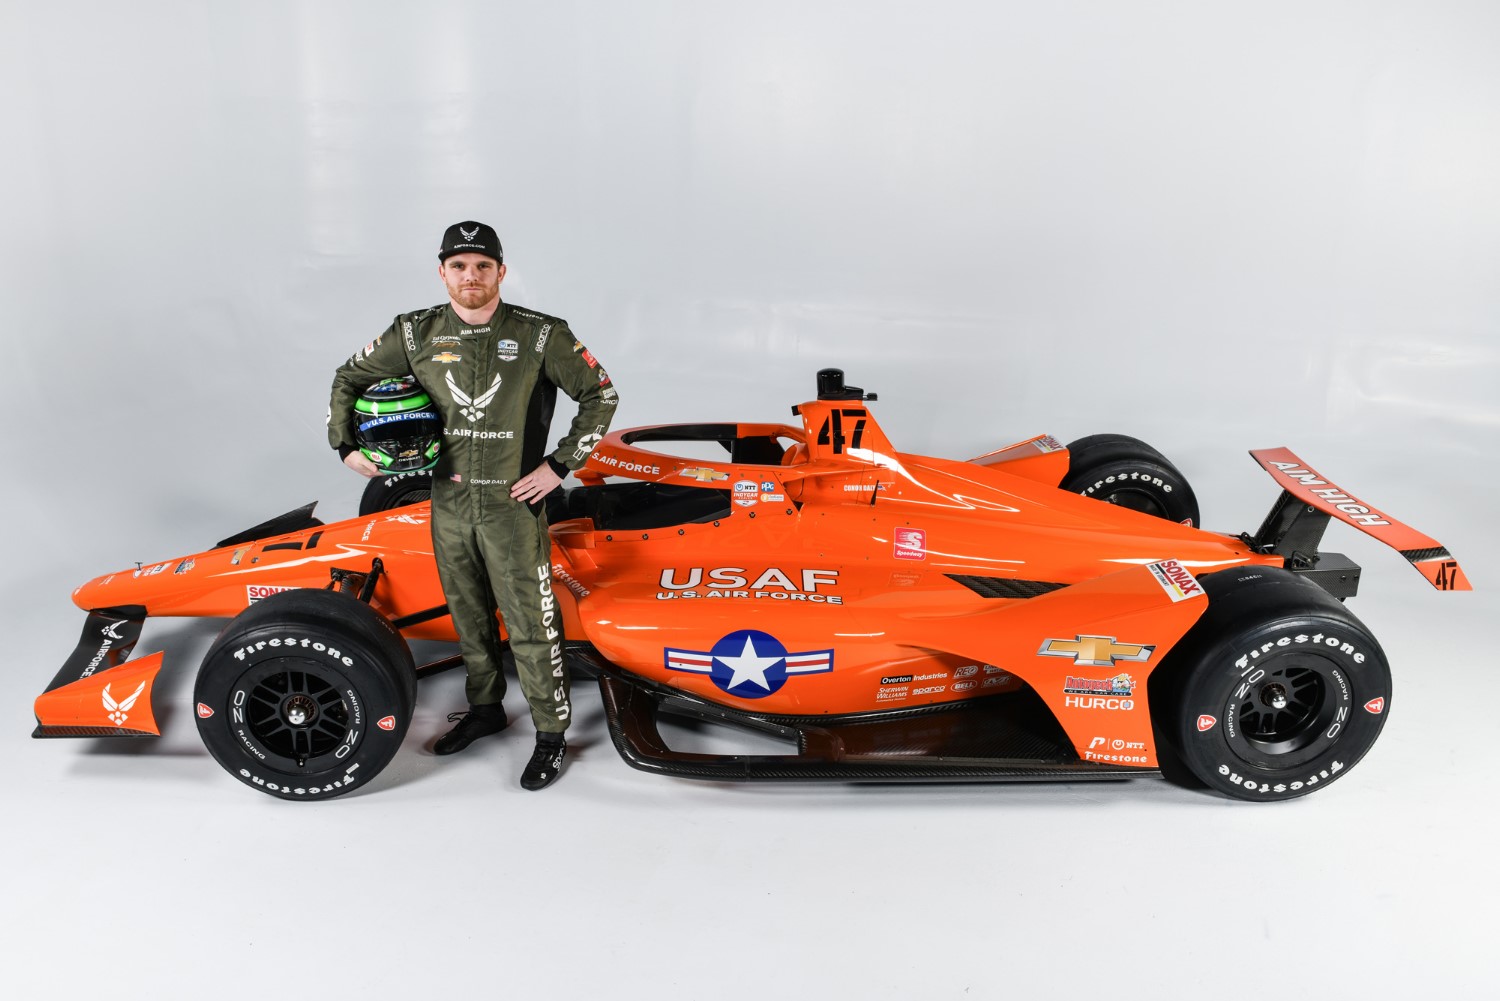 Conor Day's Indy 500 ride